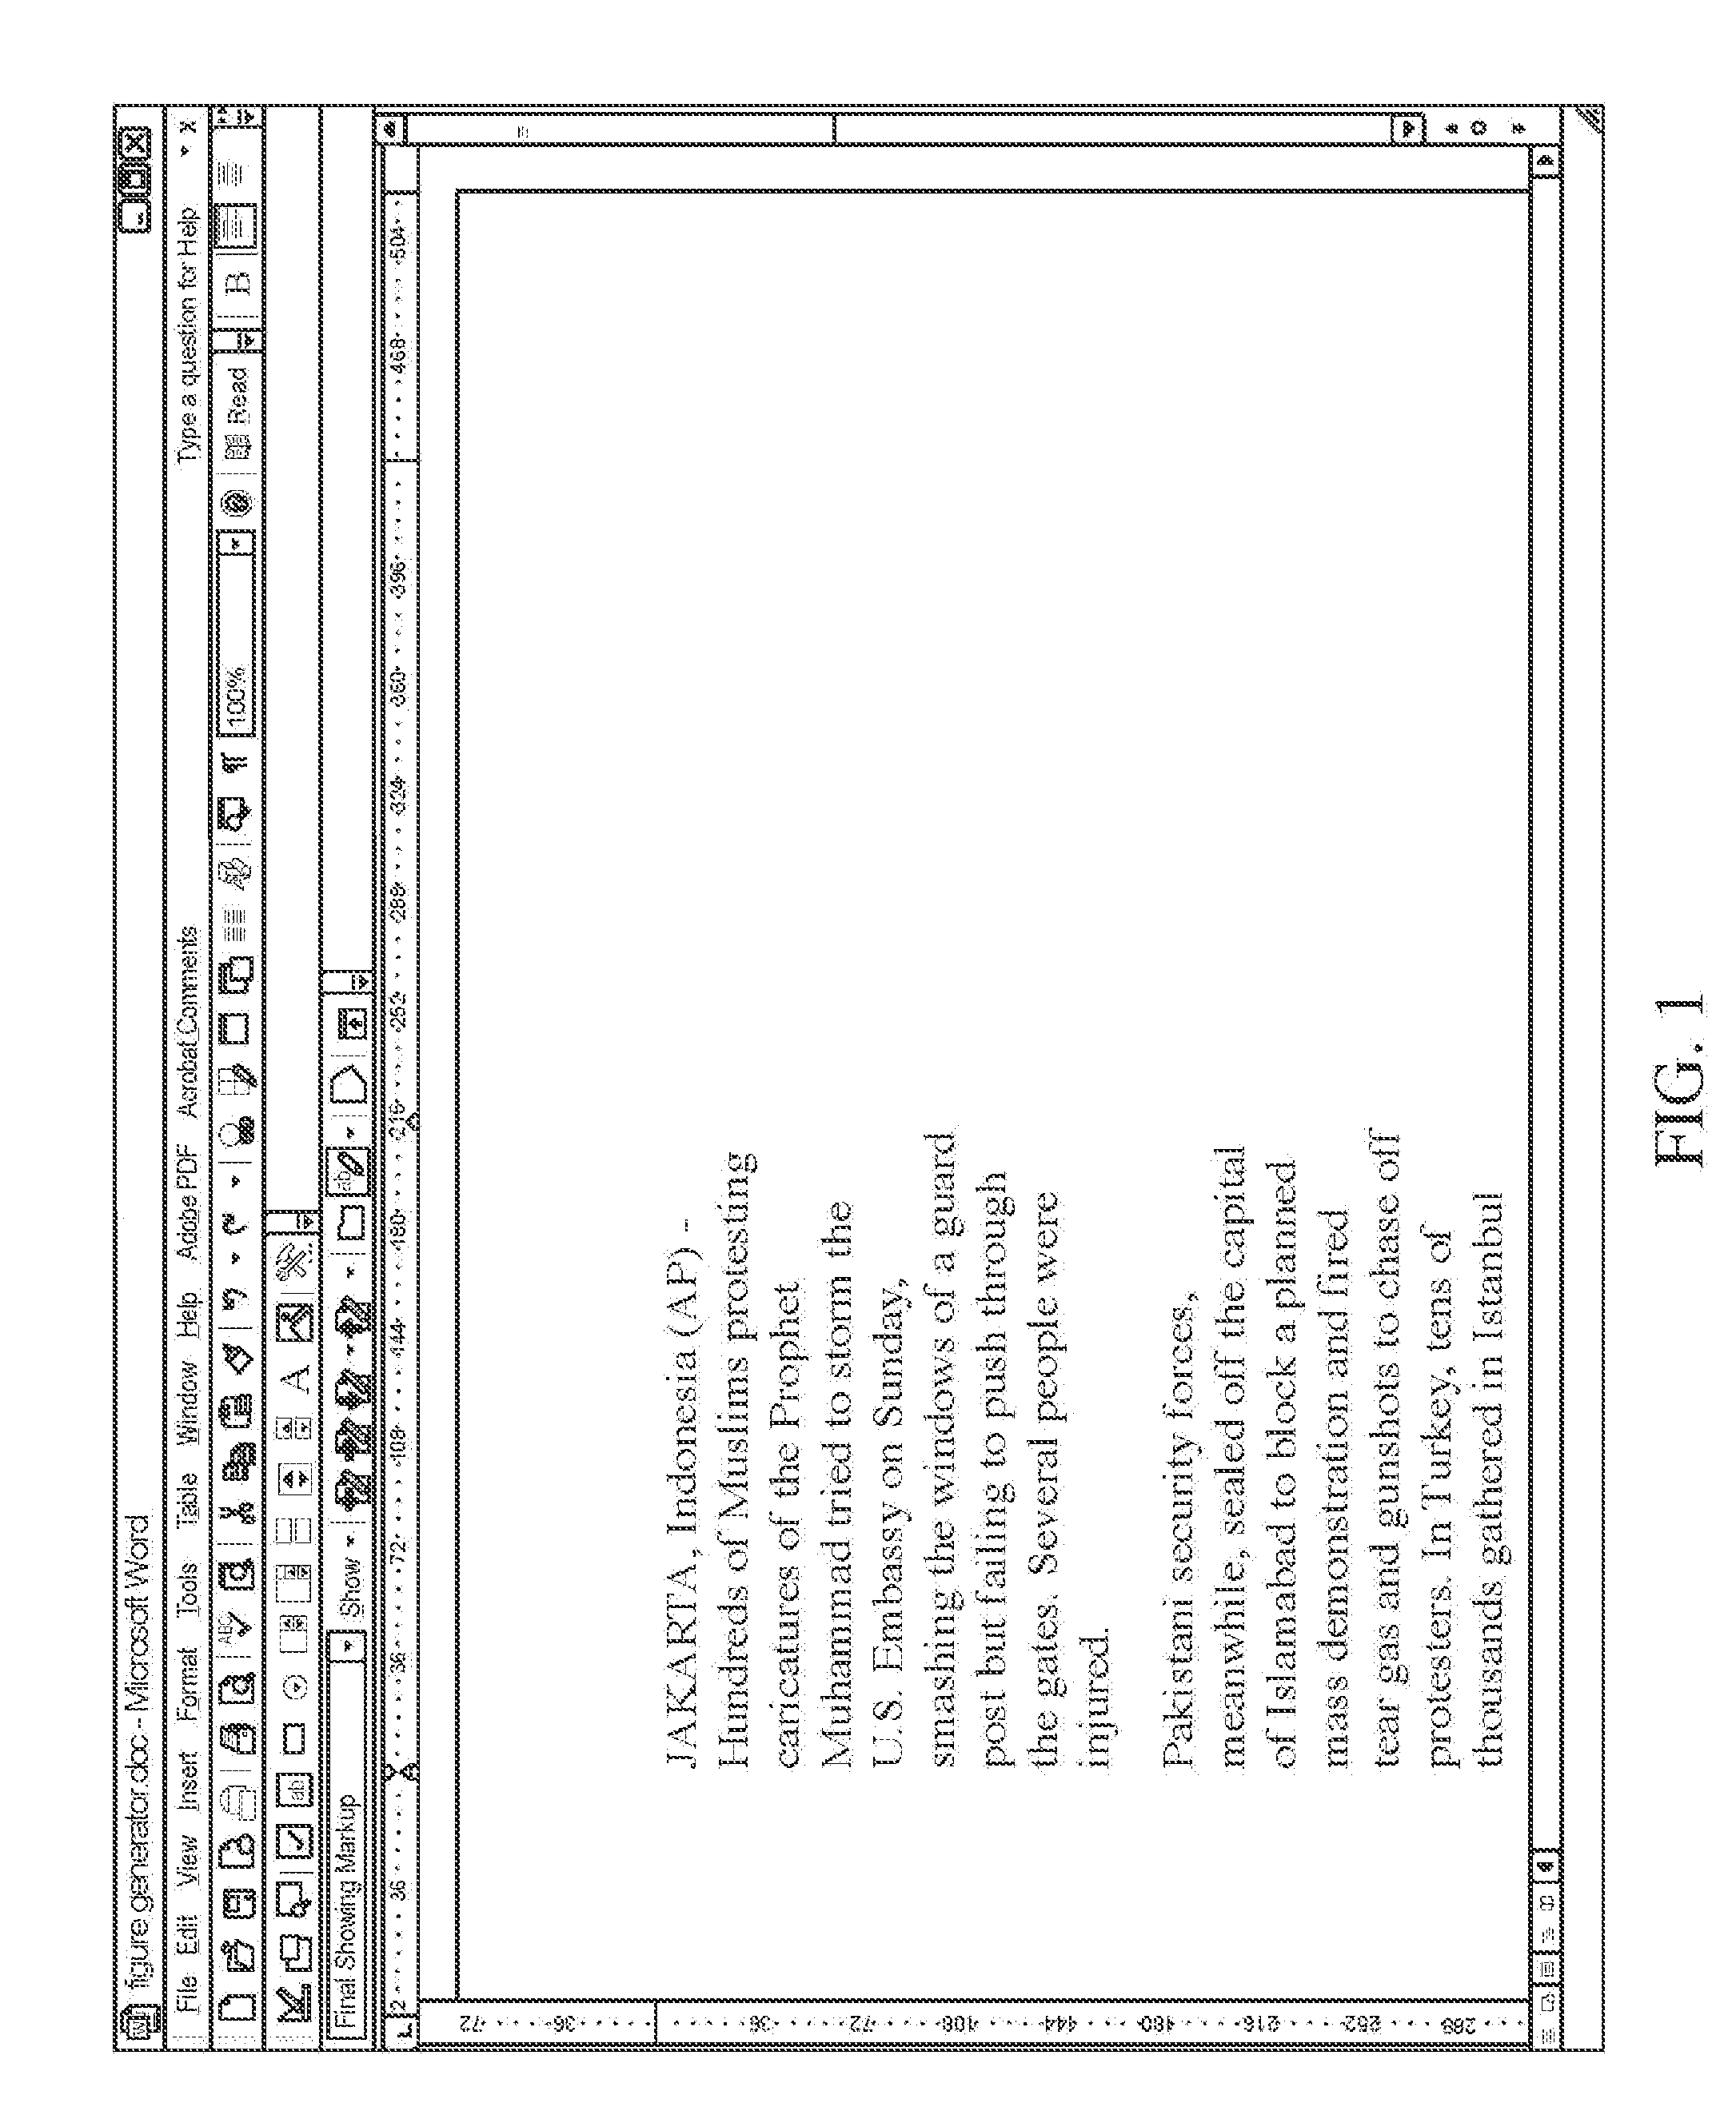 Systems and Methods for Embedded Internet Searching, and Result Display